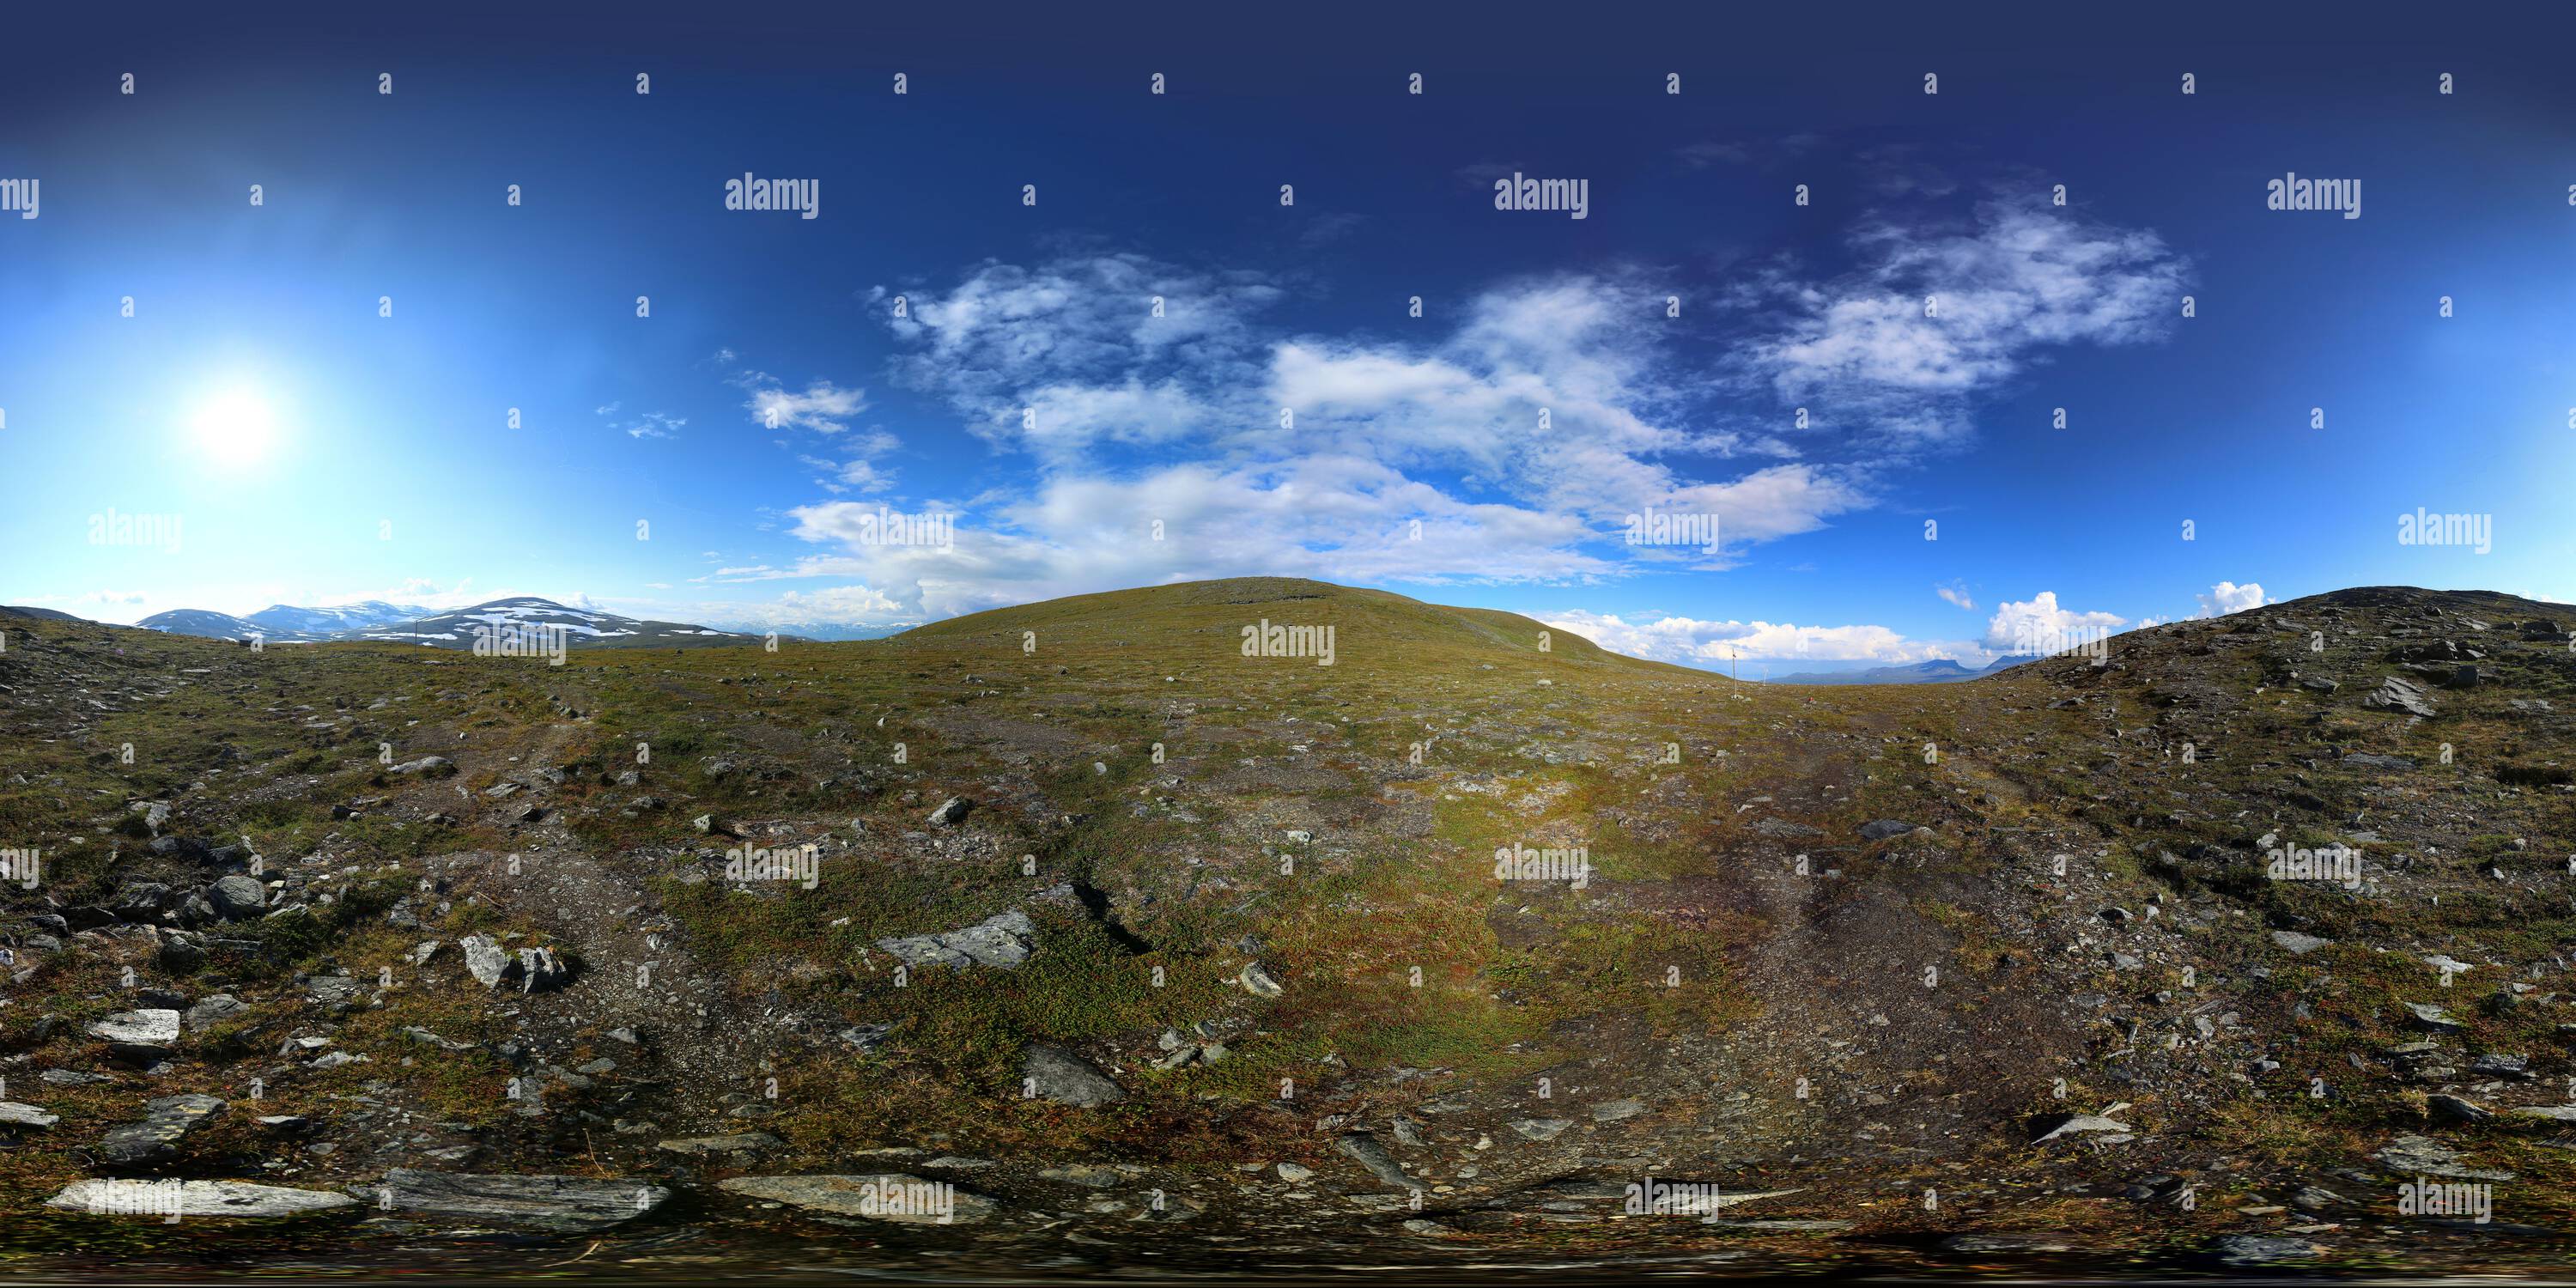 360 degree panoramic view of Spherical panorama on track beneath Mount Nuolja, Norrbotten, Sweden. Equirectangular projection is used.